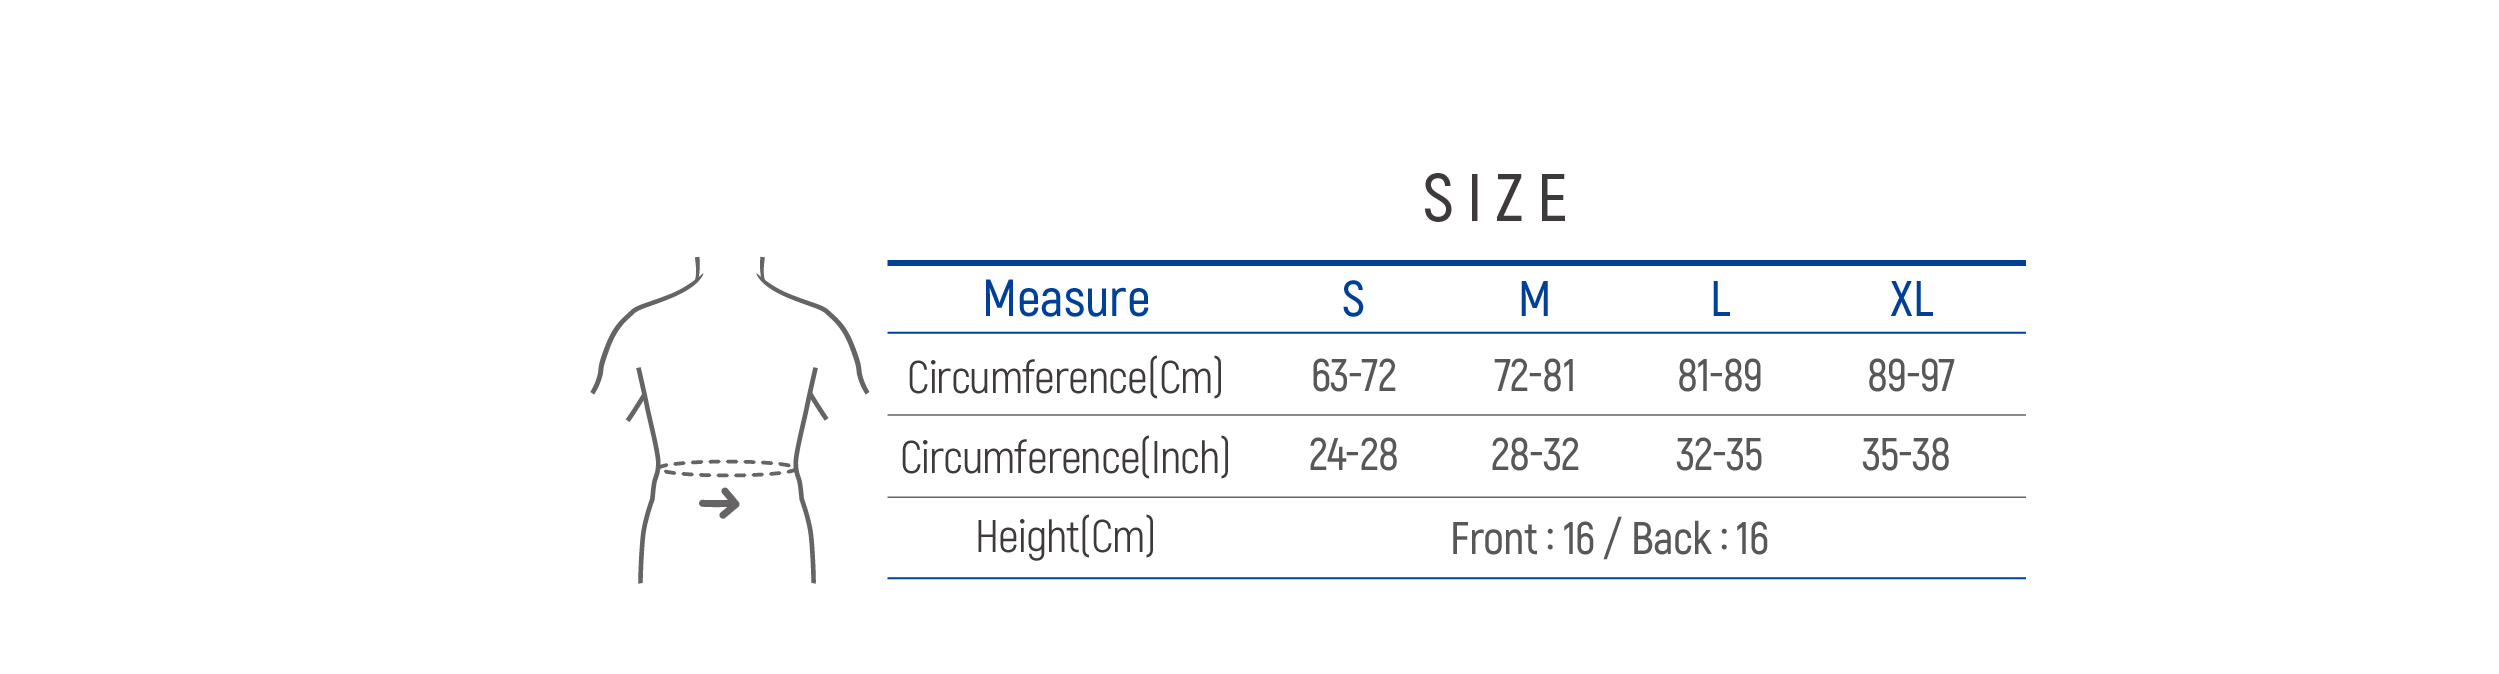 DR-B123 Size table image